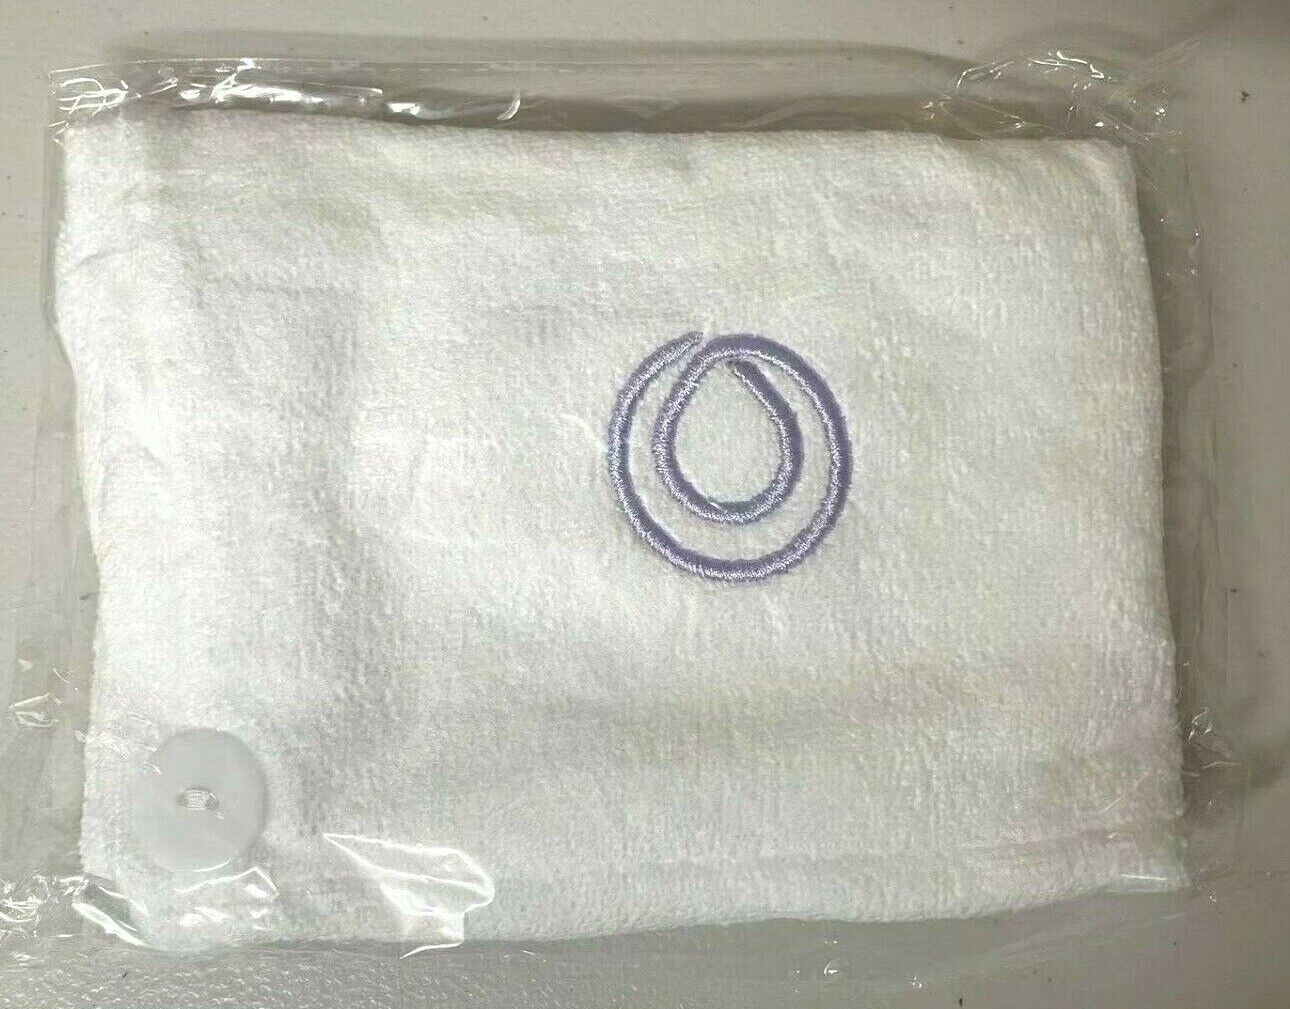 Monat Microfiber Hair Wrap Towel Best Offer Free Shipping Limited!!